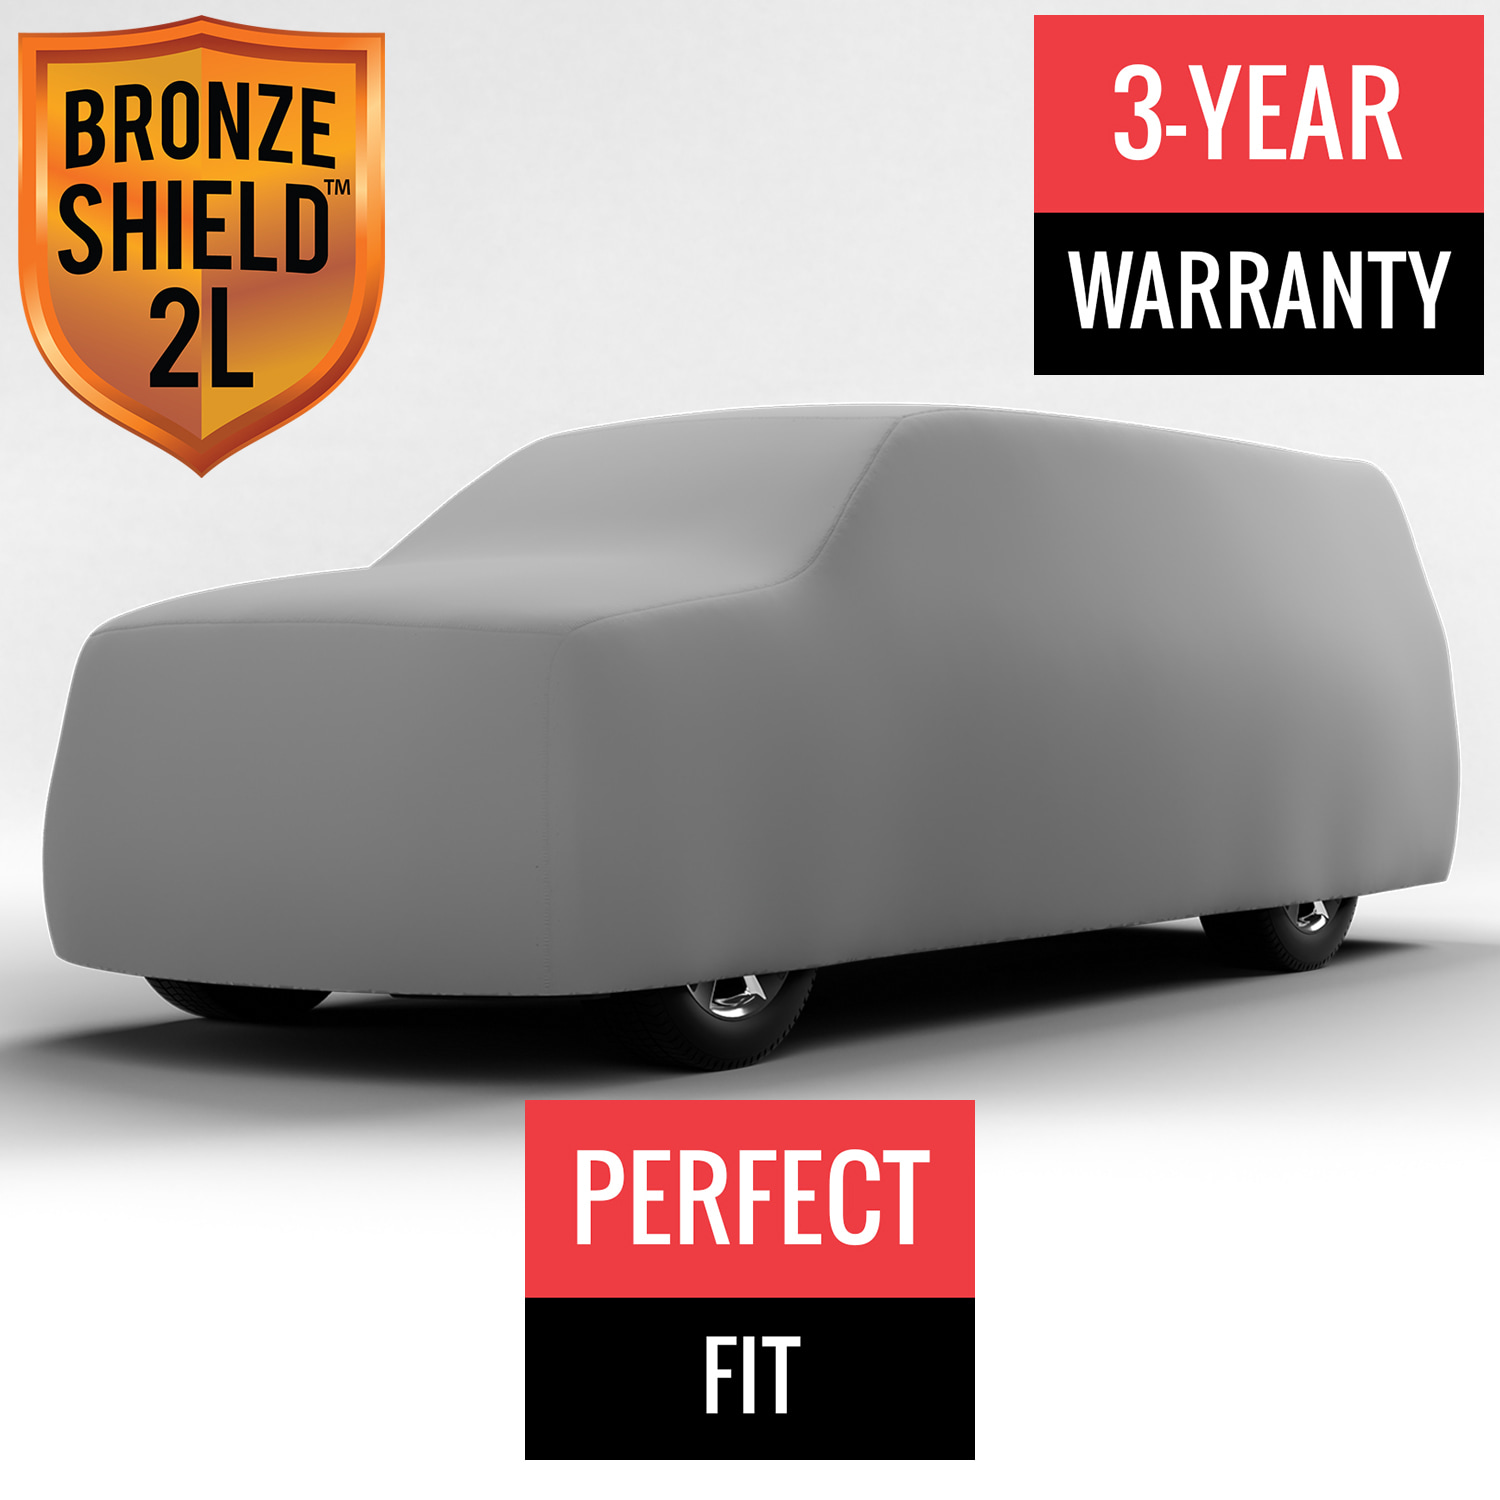 Bronze Shield 2L - Car Cover for GMC K25 Pickup 1971 Regular Cab Pickup 6.5 Feet Bed with Camper Shell